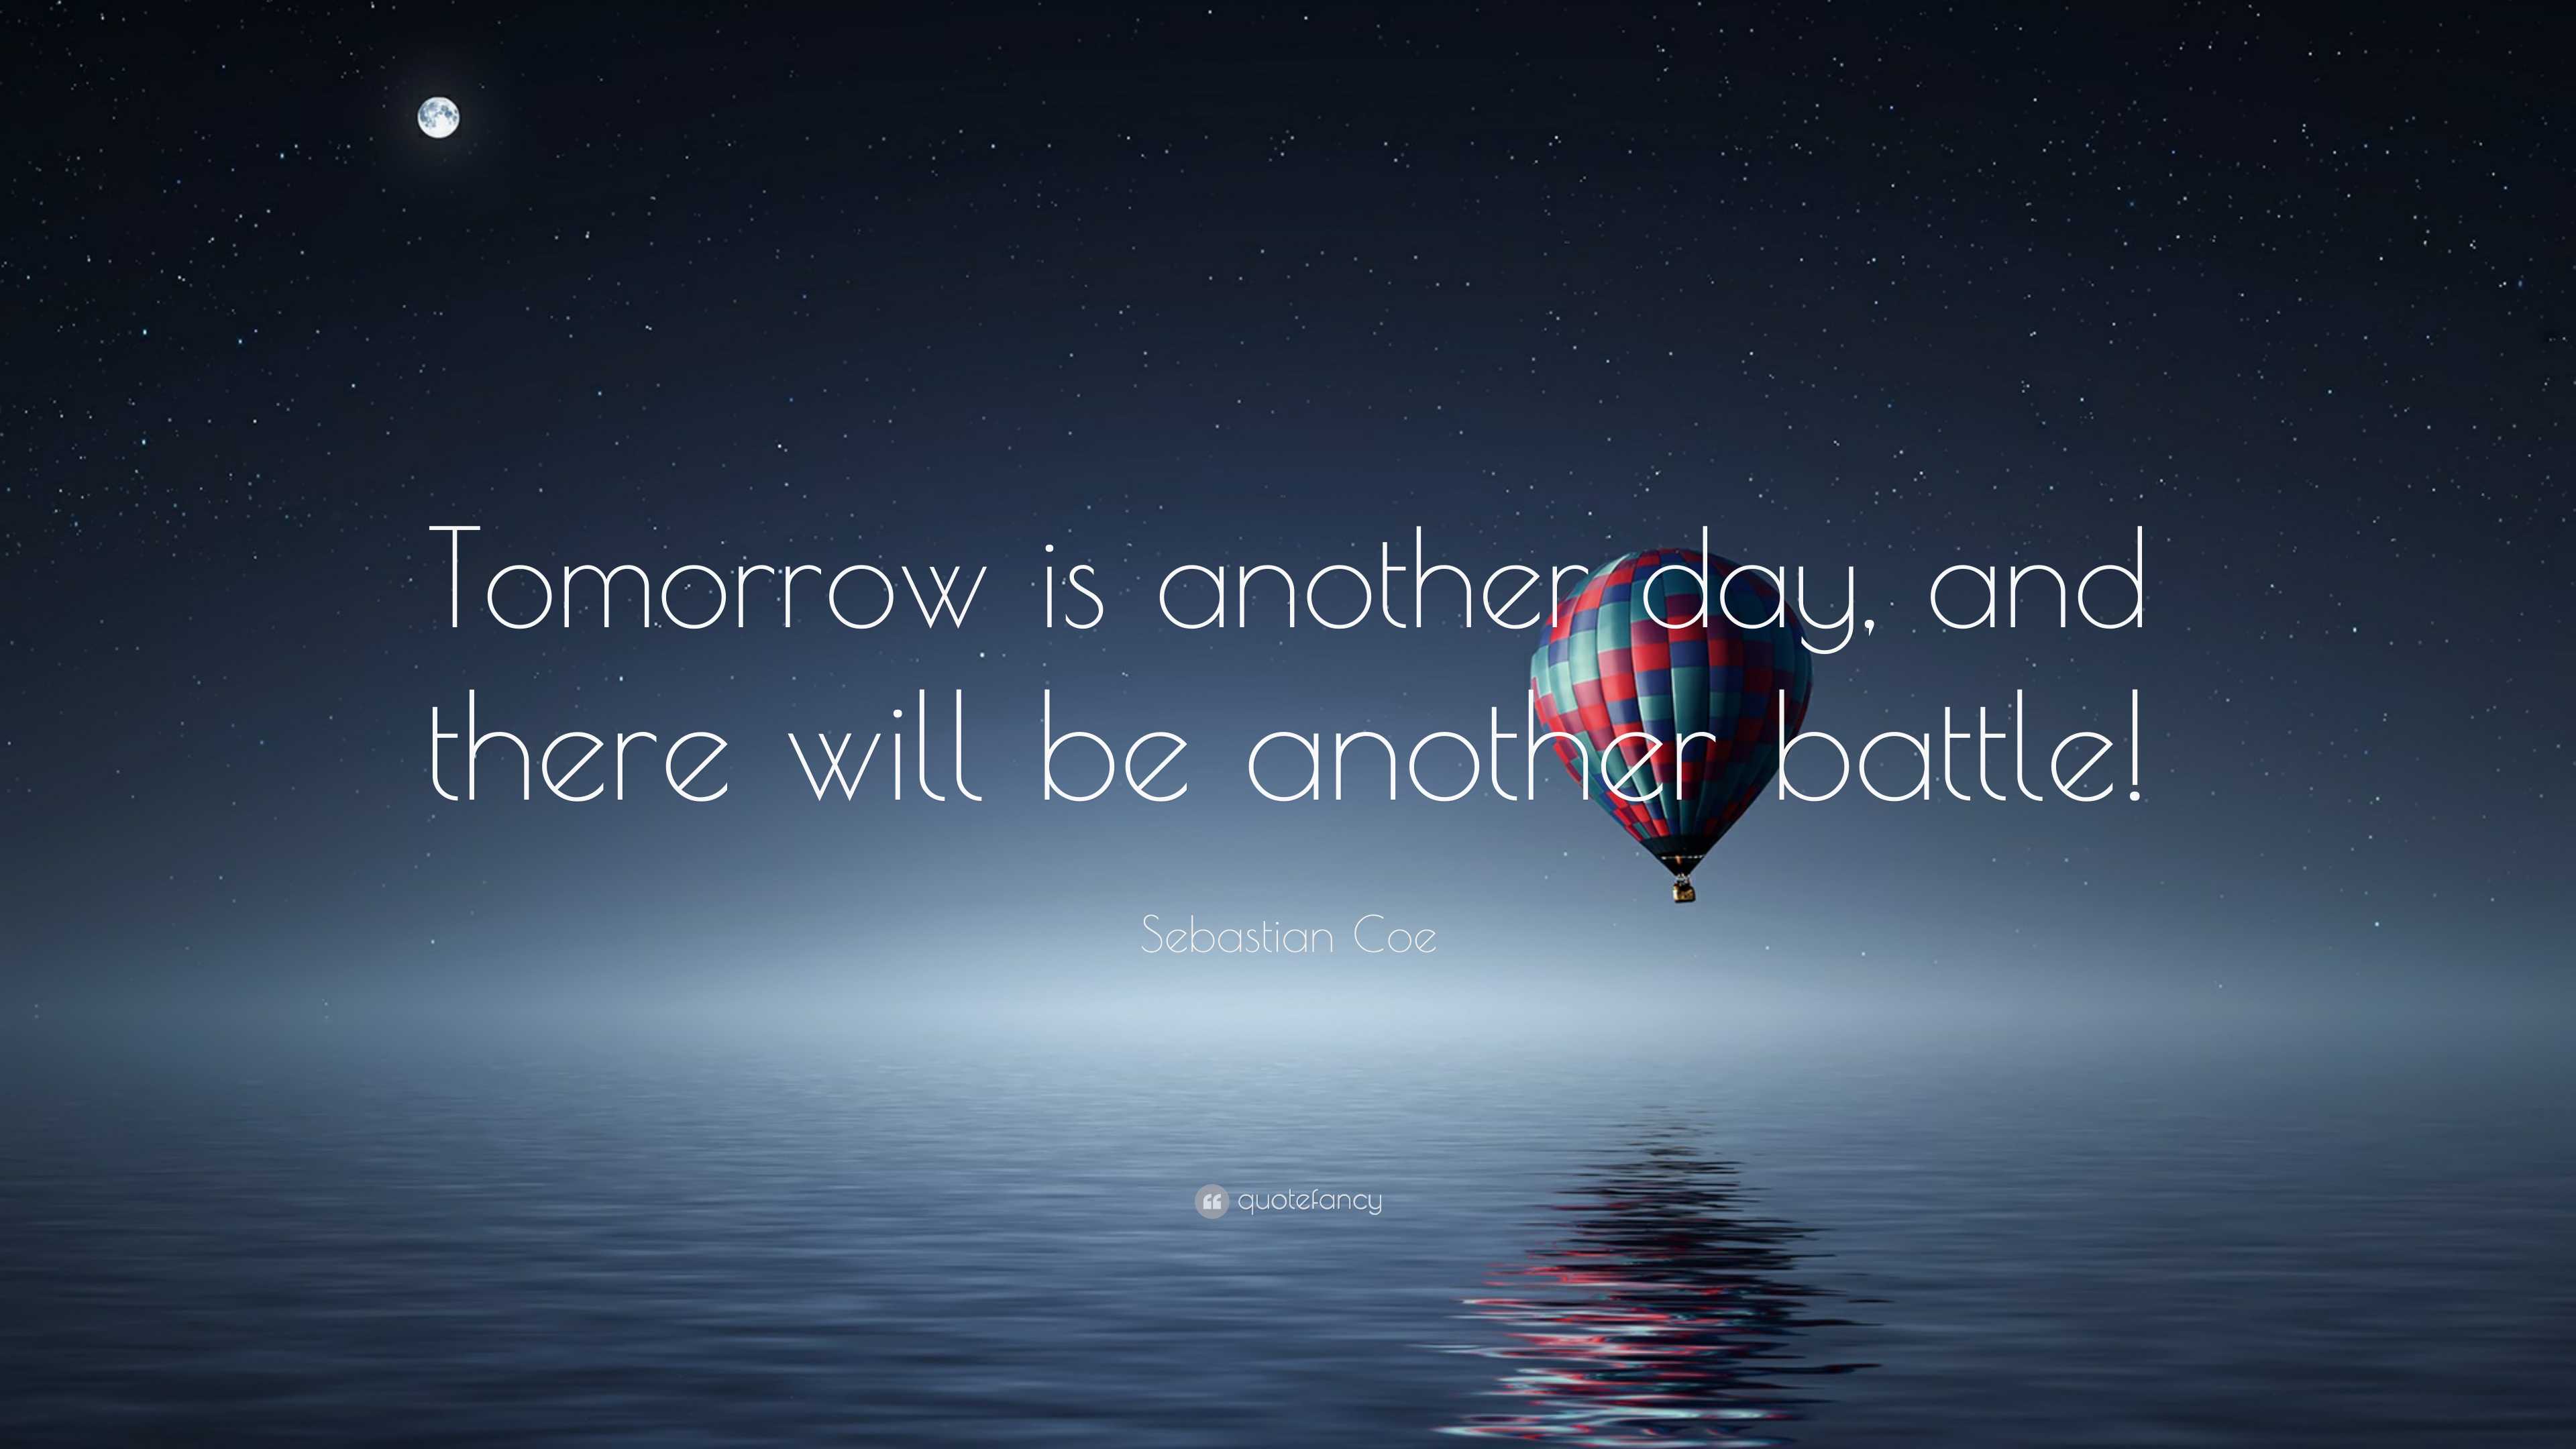 Sebastian Coe Quote: “Tomorrow is another day